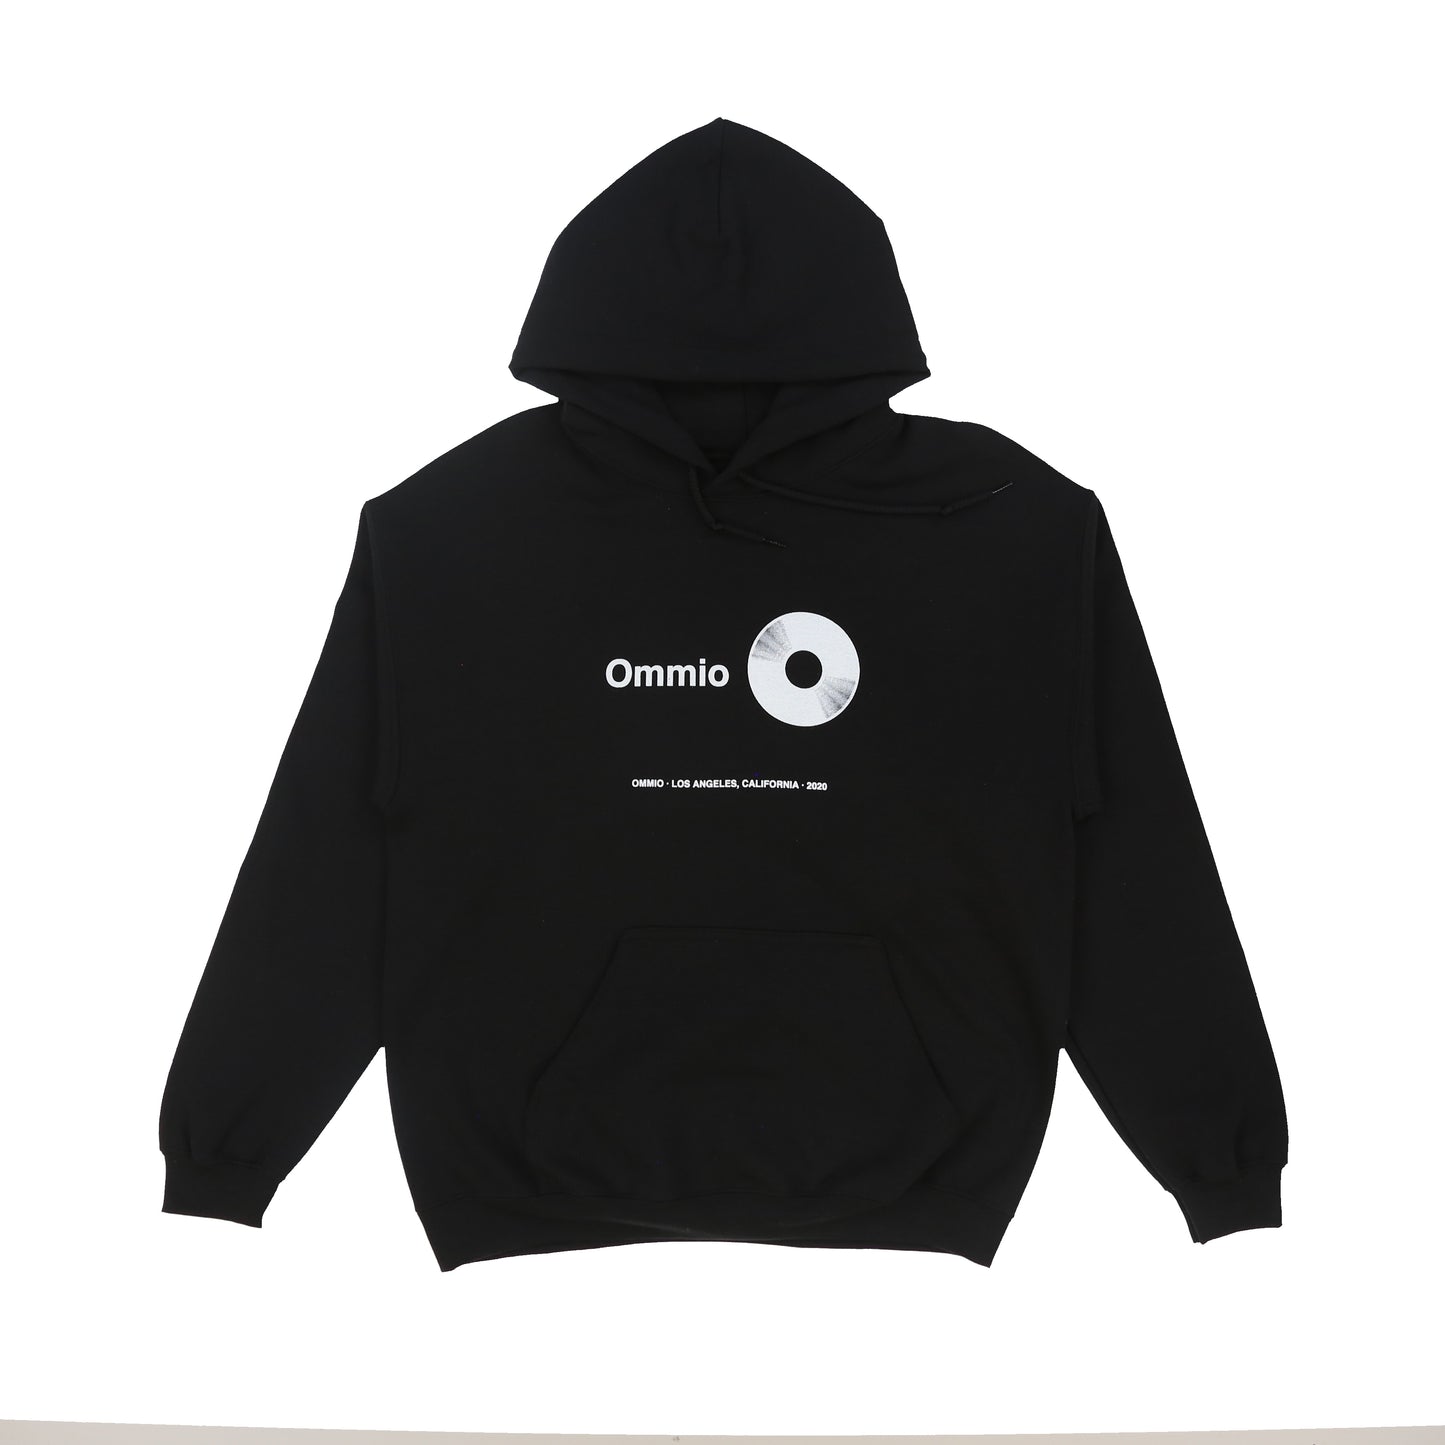 FOR PROMO USE ONLY HOODY // BLACK